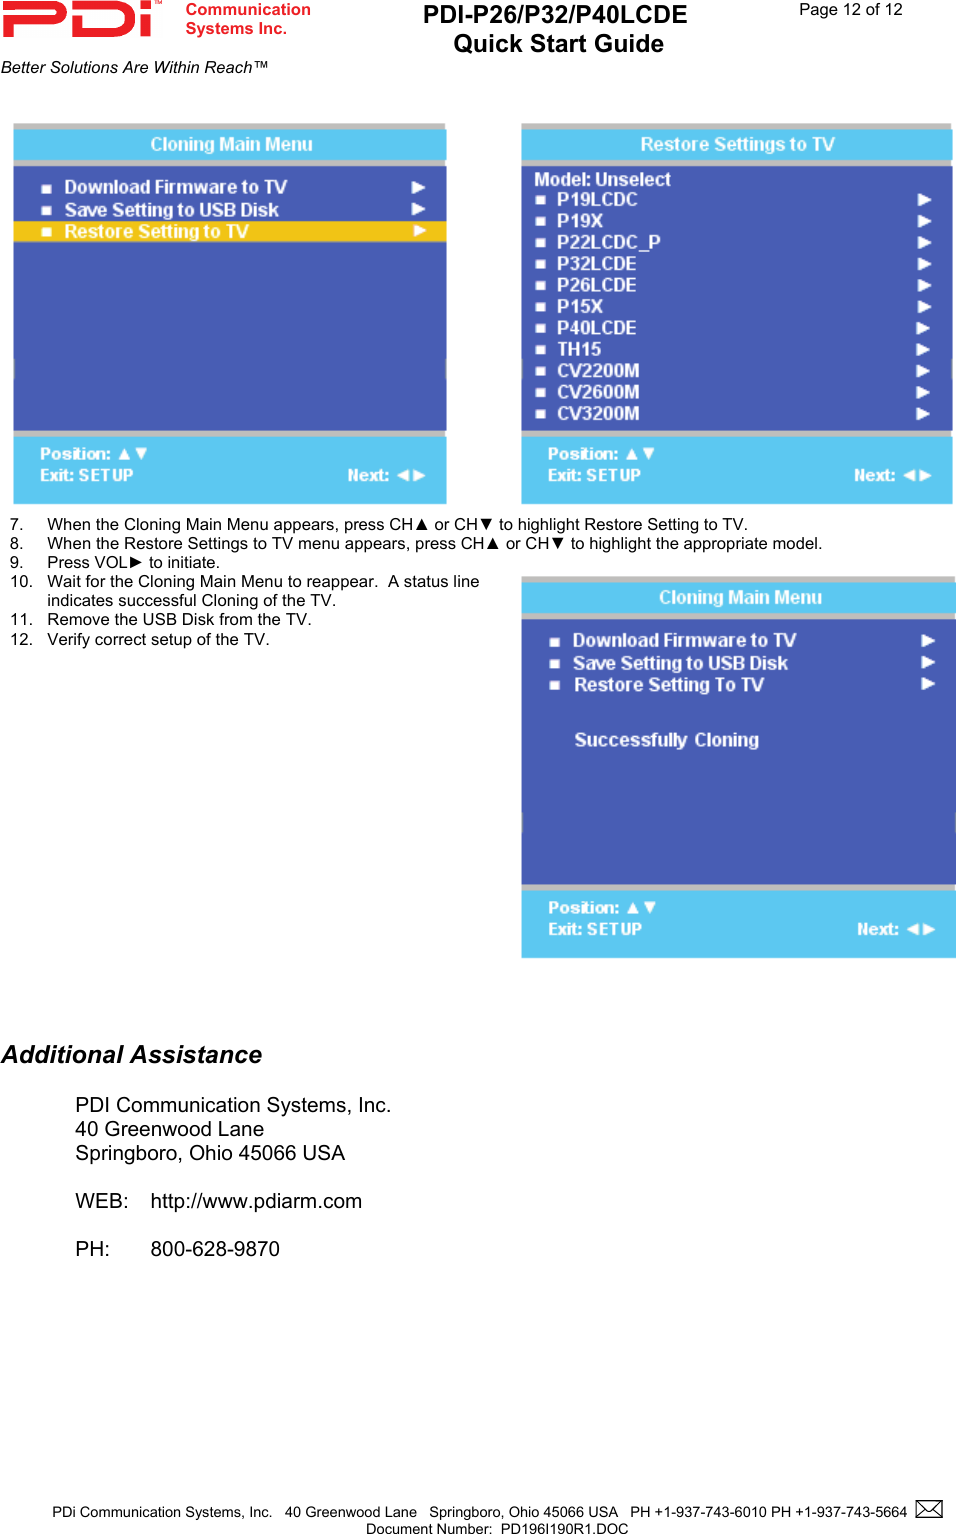  Communication  Systems Inc. PDI-P26/P32/P40LCDE  Quick Start Guide  Page 12 of 12Better Solutions Are Within Reach™  PDi Communication Systems, Inc.   40 Greenwood Lane   Springboro, Ohio 45066 USA   PH +1-937-743-6010 PH +1-937-743-5664    Document Number:  PD196I190R1.DOC      7. When the Cloning Main Menu appears, press CH▲ or CH▼ to highlight Restore Setting to TV. 8. When the Restore Settings to TV menu appears, press CH▲ or CH▼ to highlight the appropriate model.   9. Press VOL► to initiate. 10.  Wait for the Cloning Main Menu to reappear.  A status line indicates successful Cloning of the TV. 11.  Remove the USB Disk from the TV. 12.  Verify correct setup of the TV.     Additional Assistance  PDI Communication Systems, Inc. 40 Greenwood Lane Springboro, Ohio 45066 USA  WEB: http://www.pdiarm.com  PH: 800-628-9870 